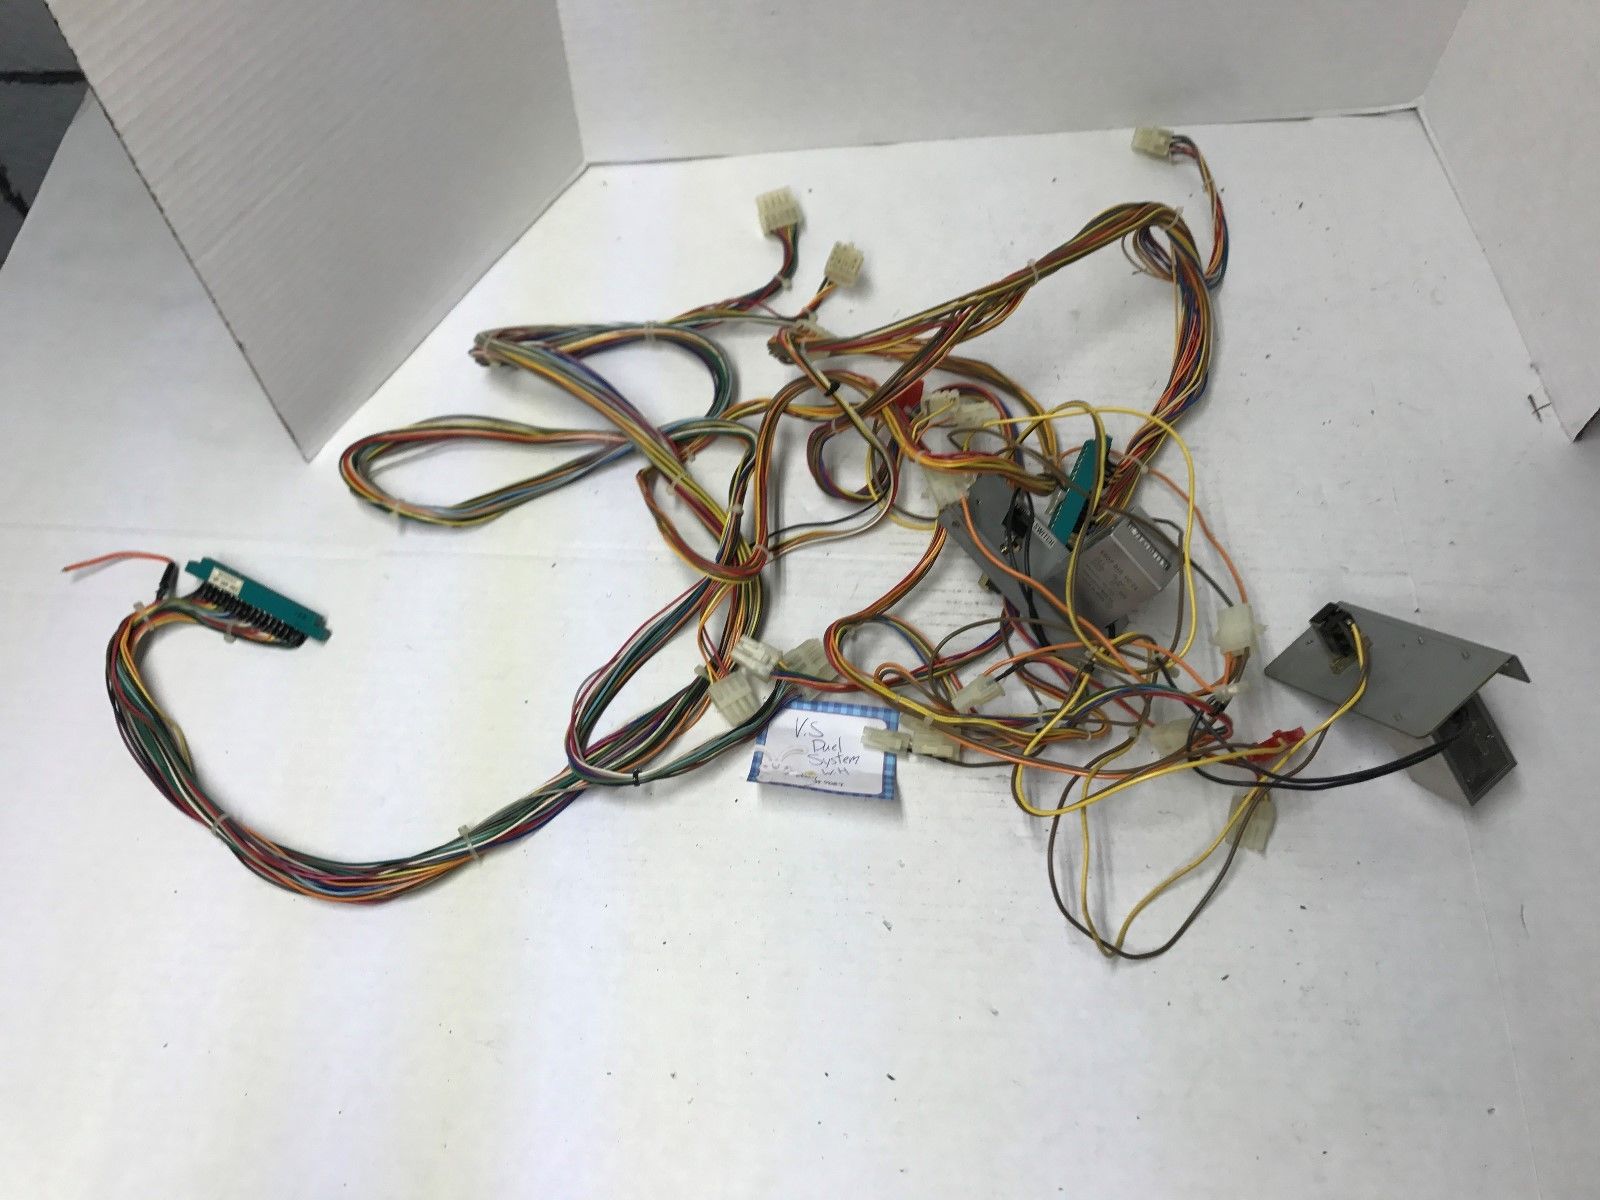 V.S. Duel System Nintendo Arcade Wiring Harness Connectors USED #4089